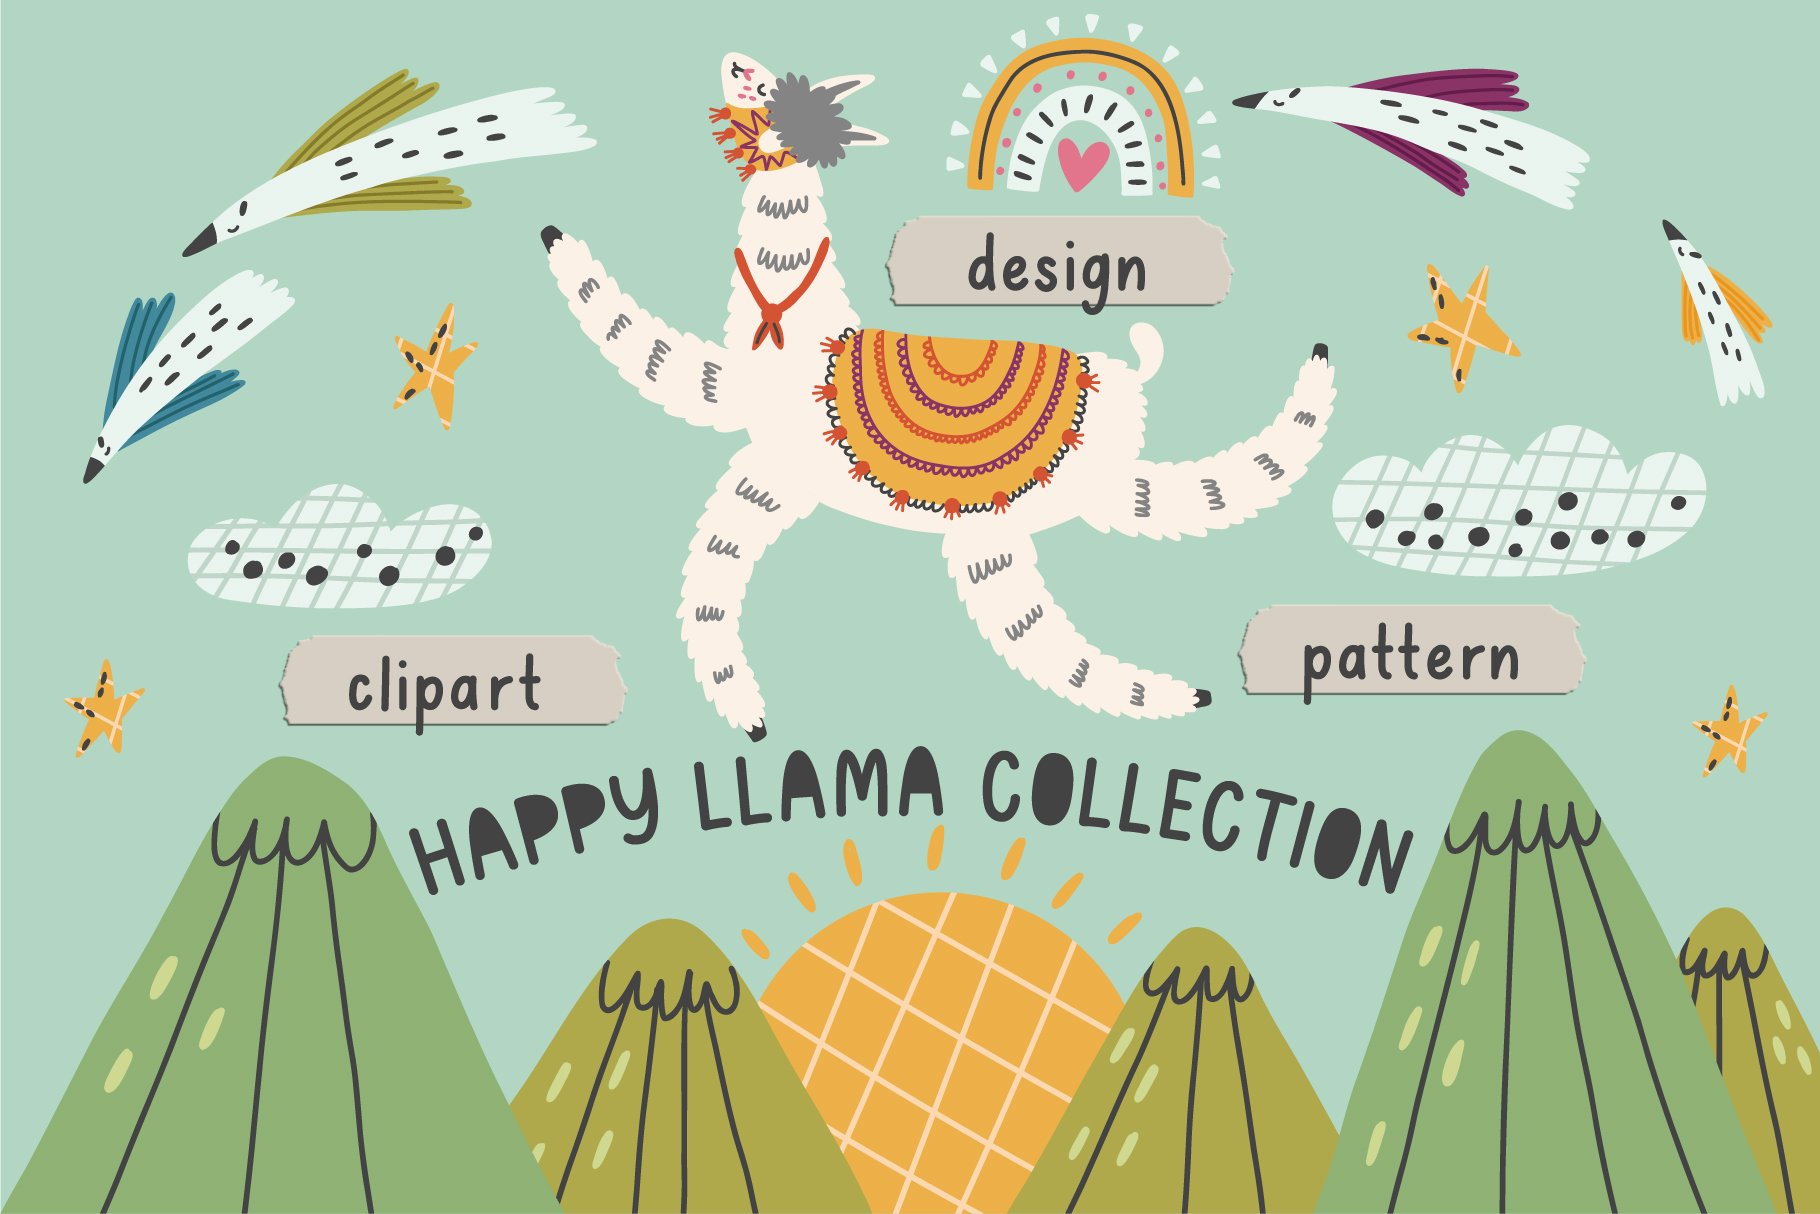 Happy Llama Collection cover image.